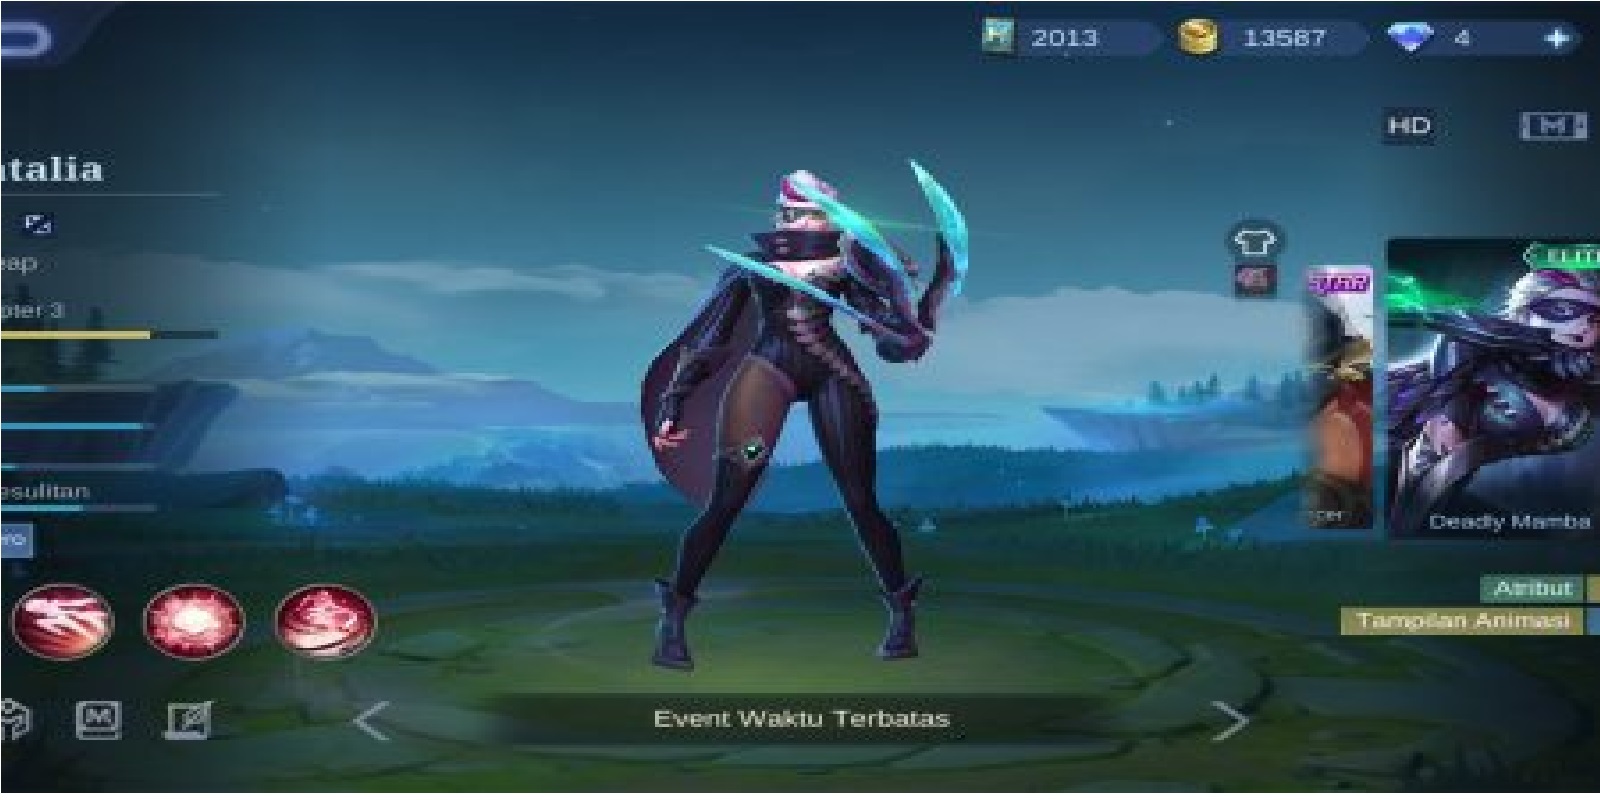 Contents of M3 Global Event Prizes Like Mobile Legends (ML) - Esports